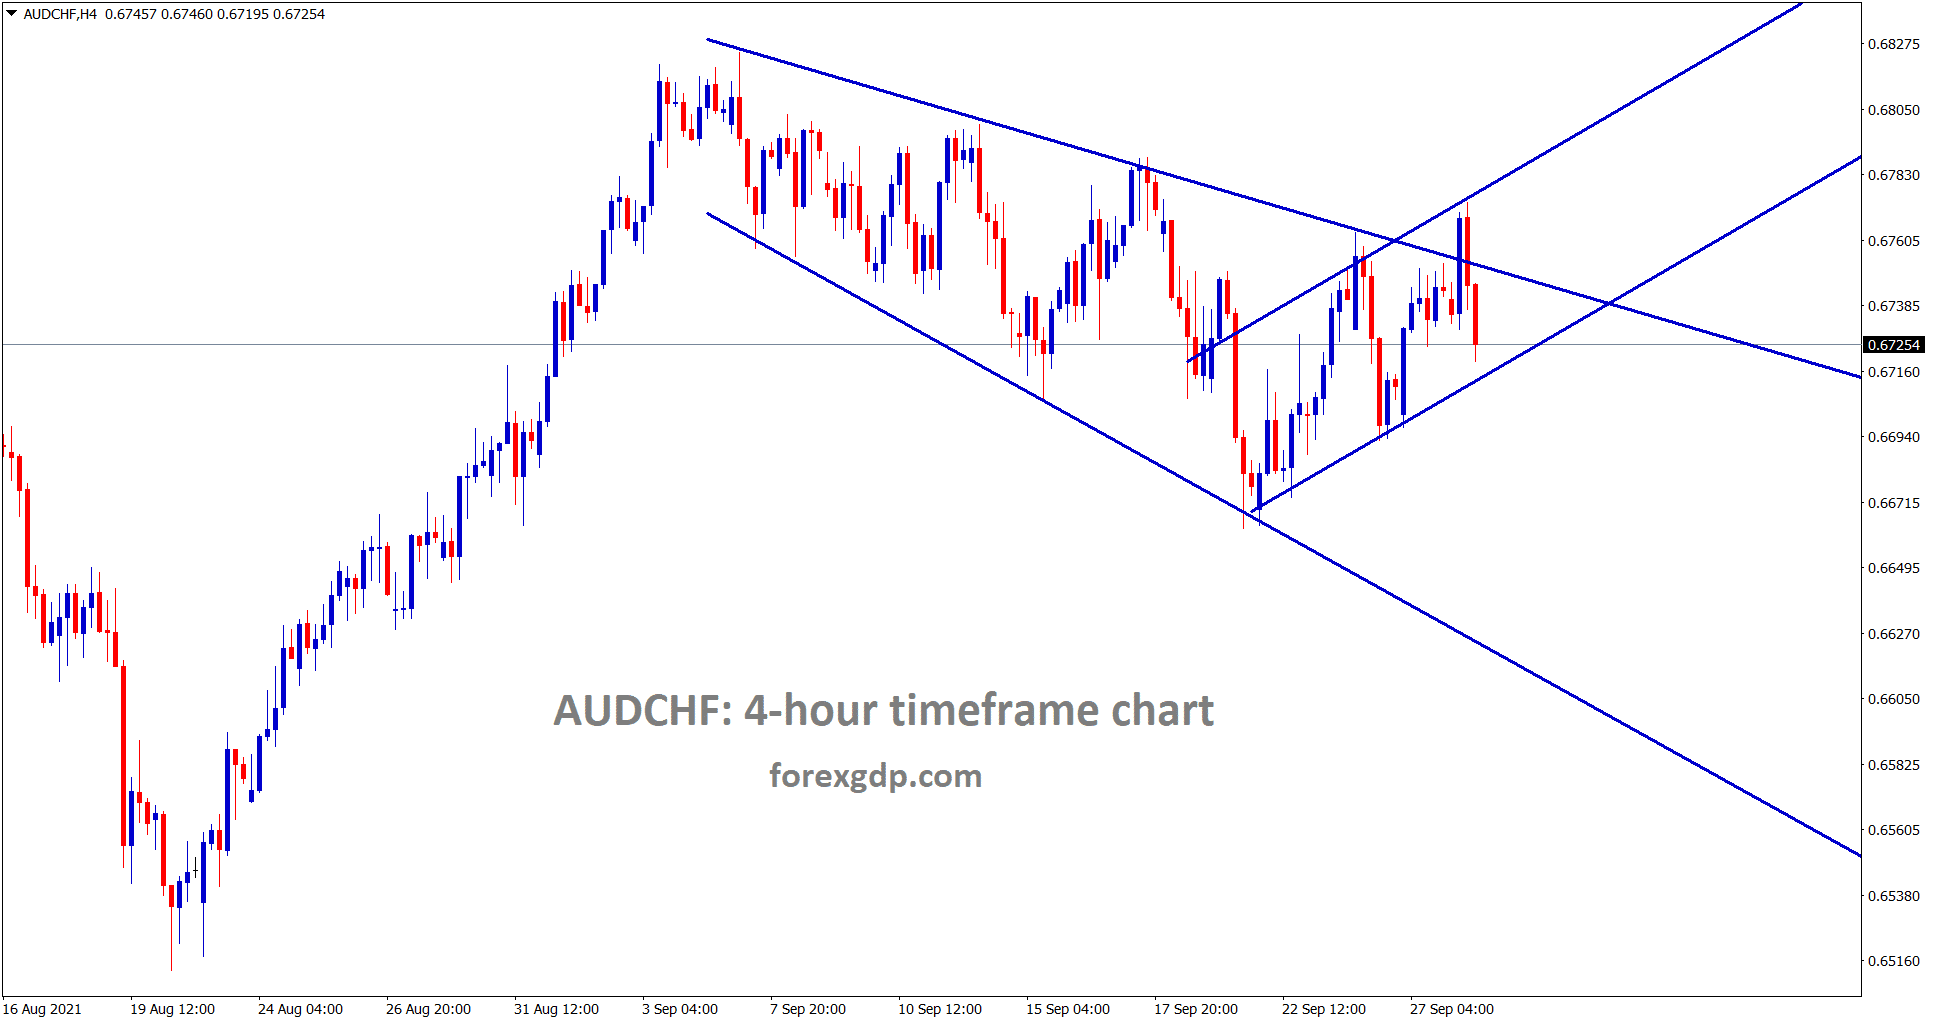 AUDCHF is moving in an Expanding channel pattern and also moving in a minor ascending channel